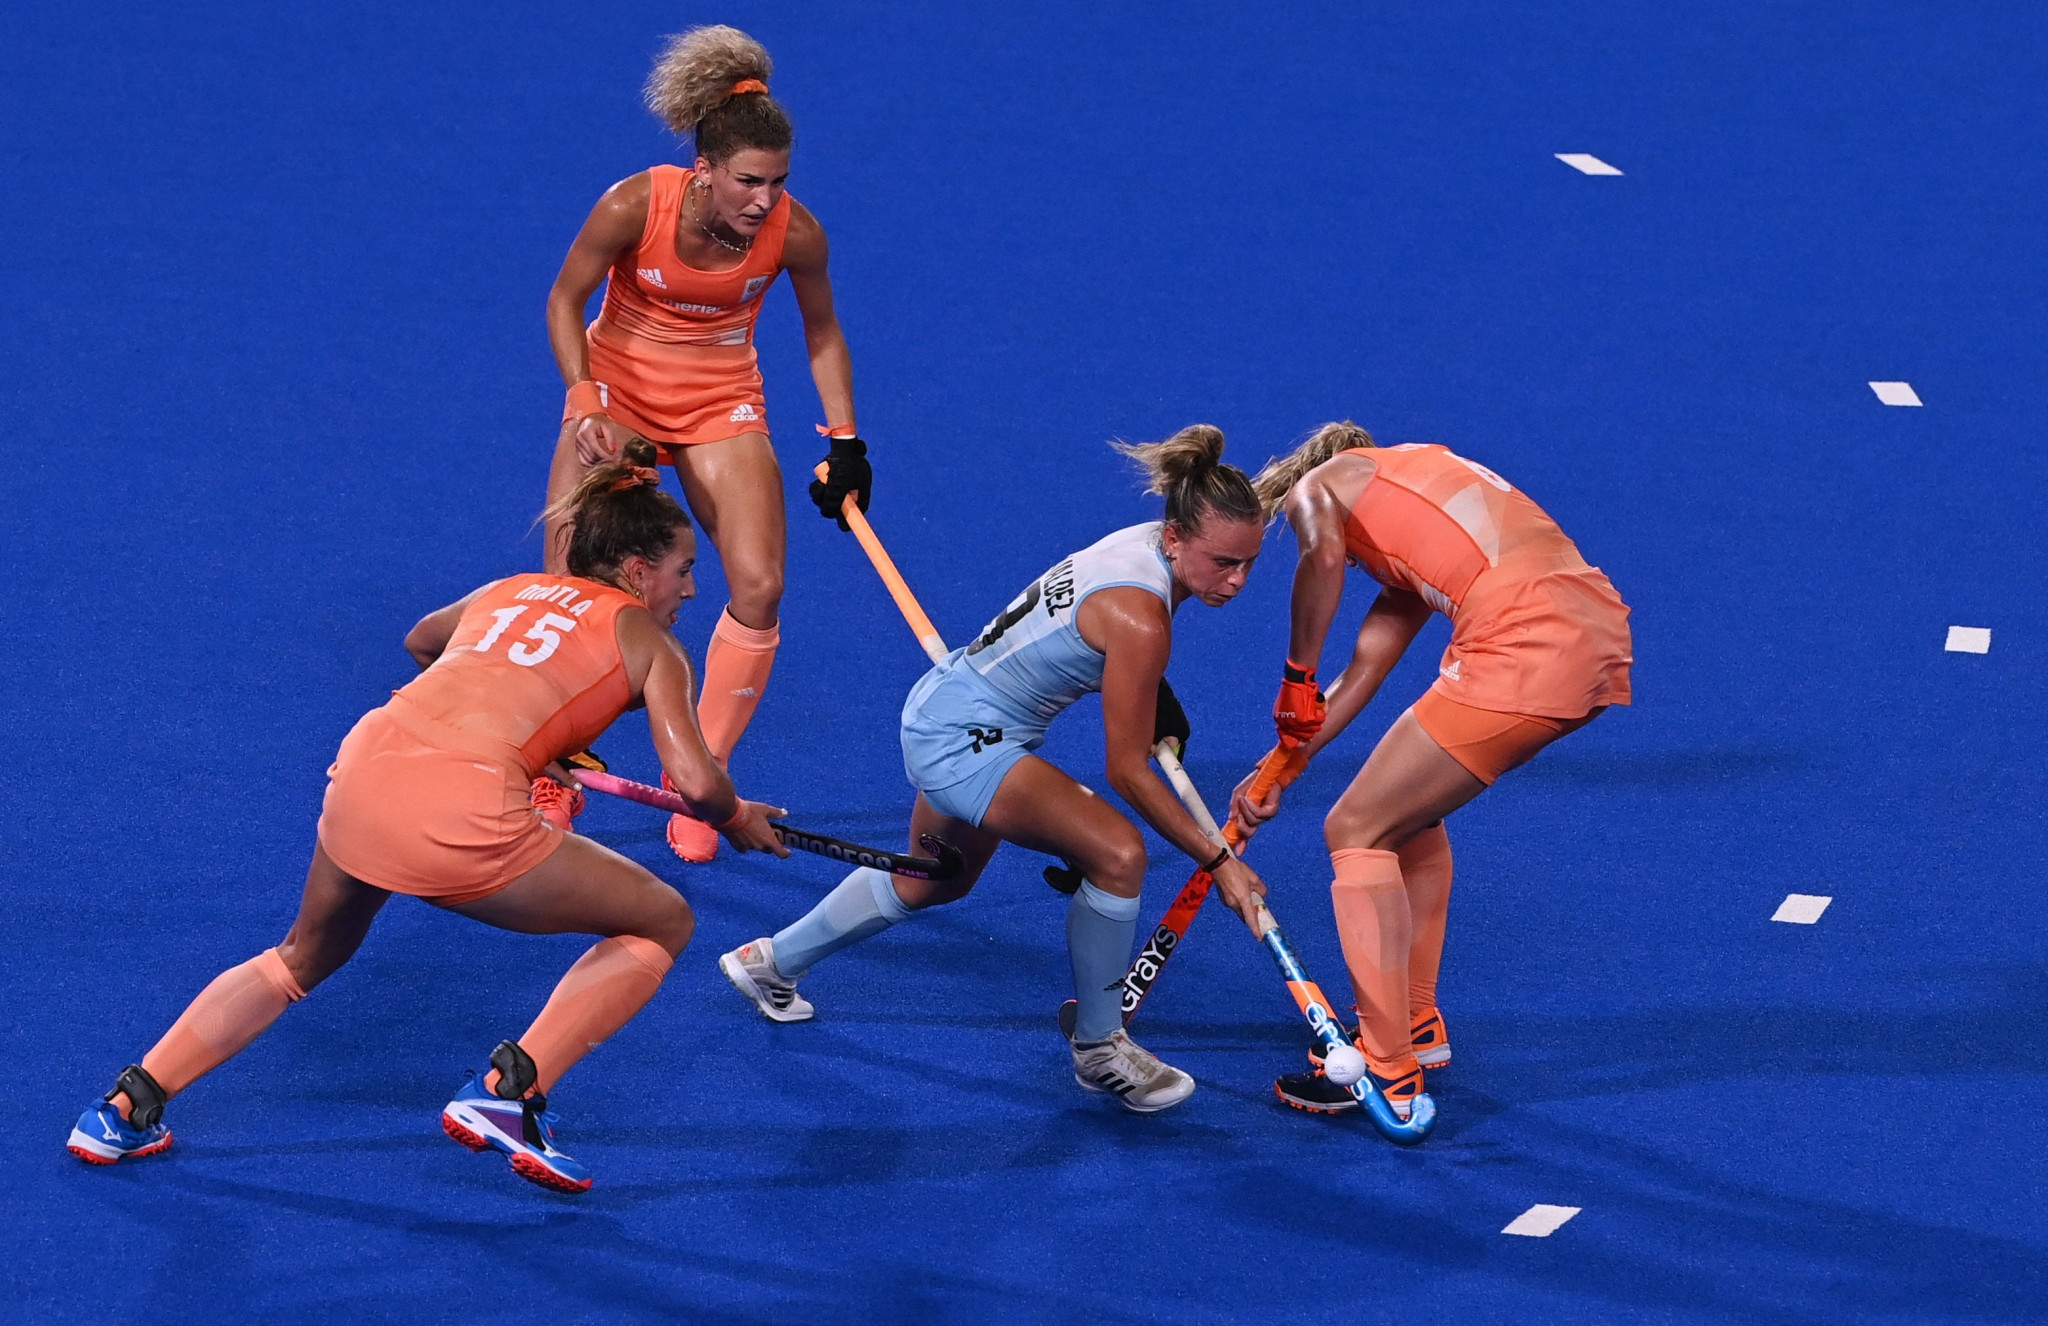 Qualification criteria set out by the International Hockey Federation has been approved by the IOC ©Getty Images